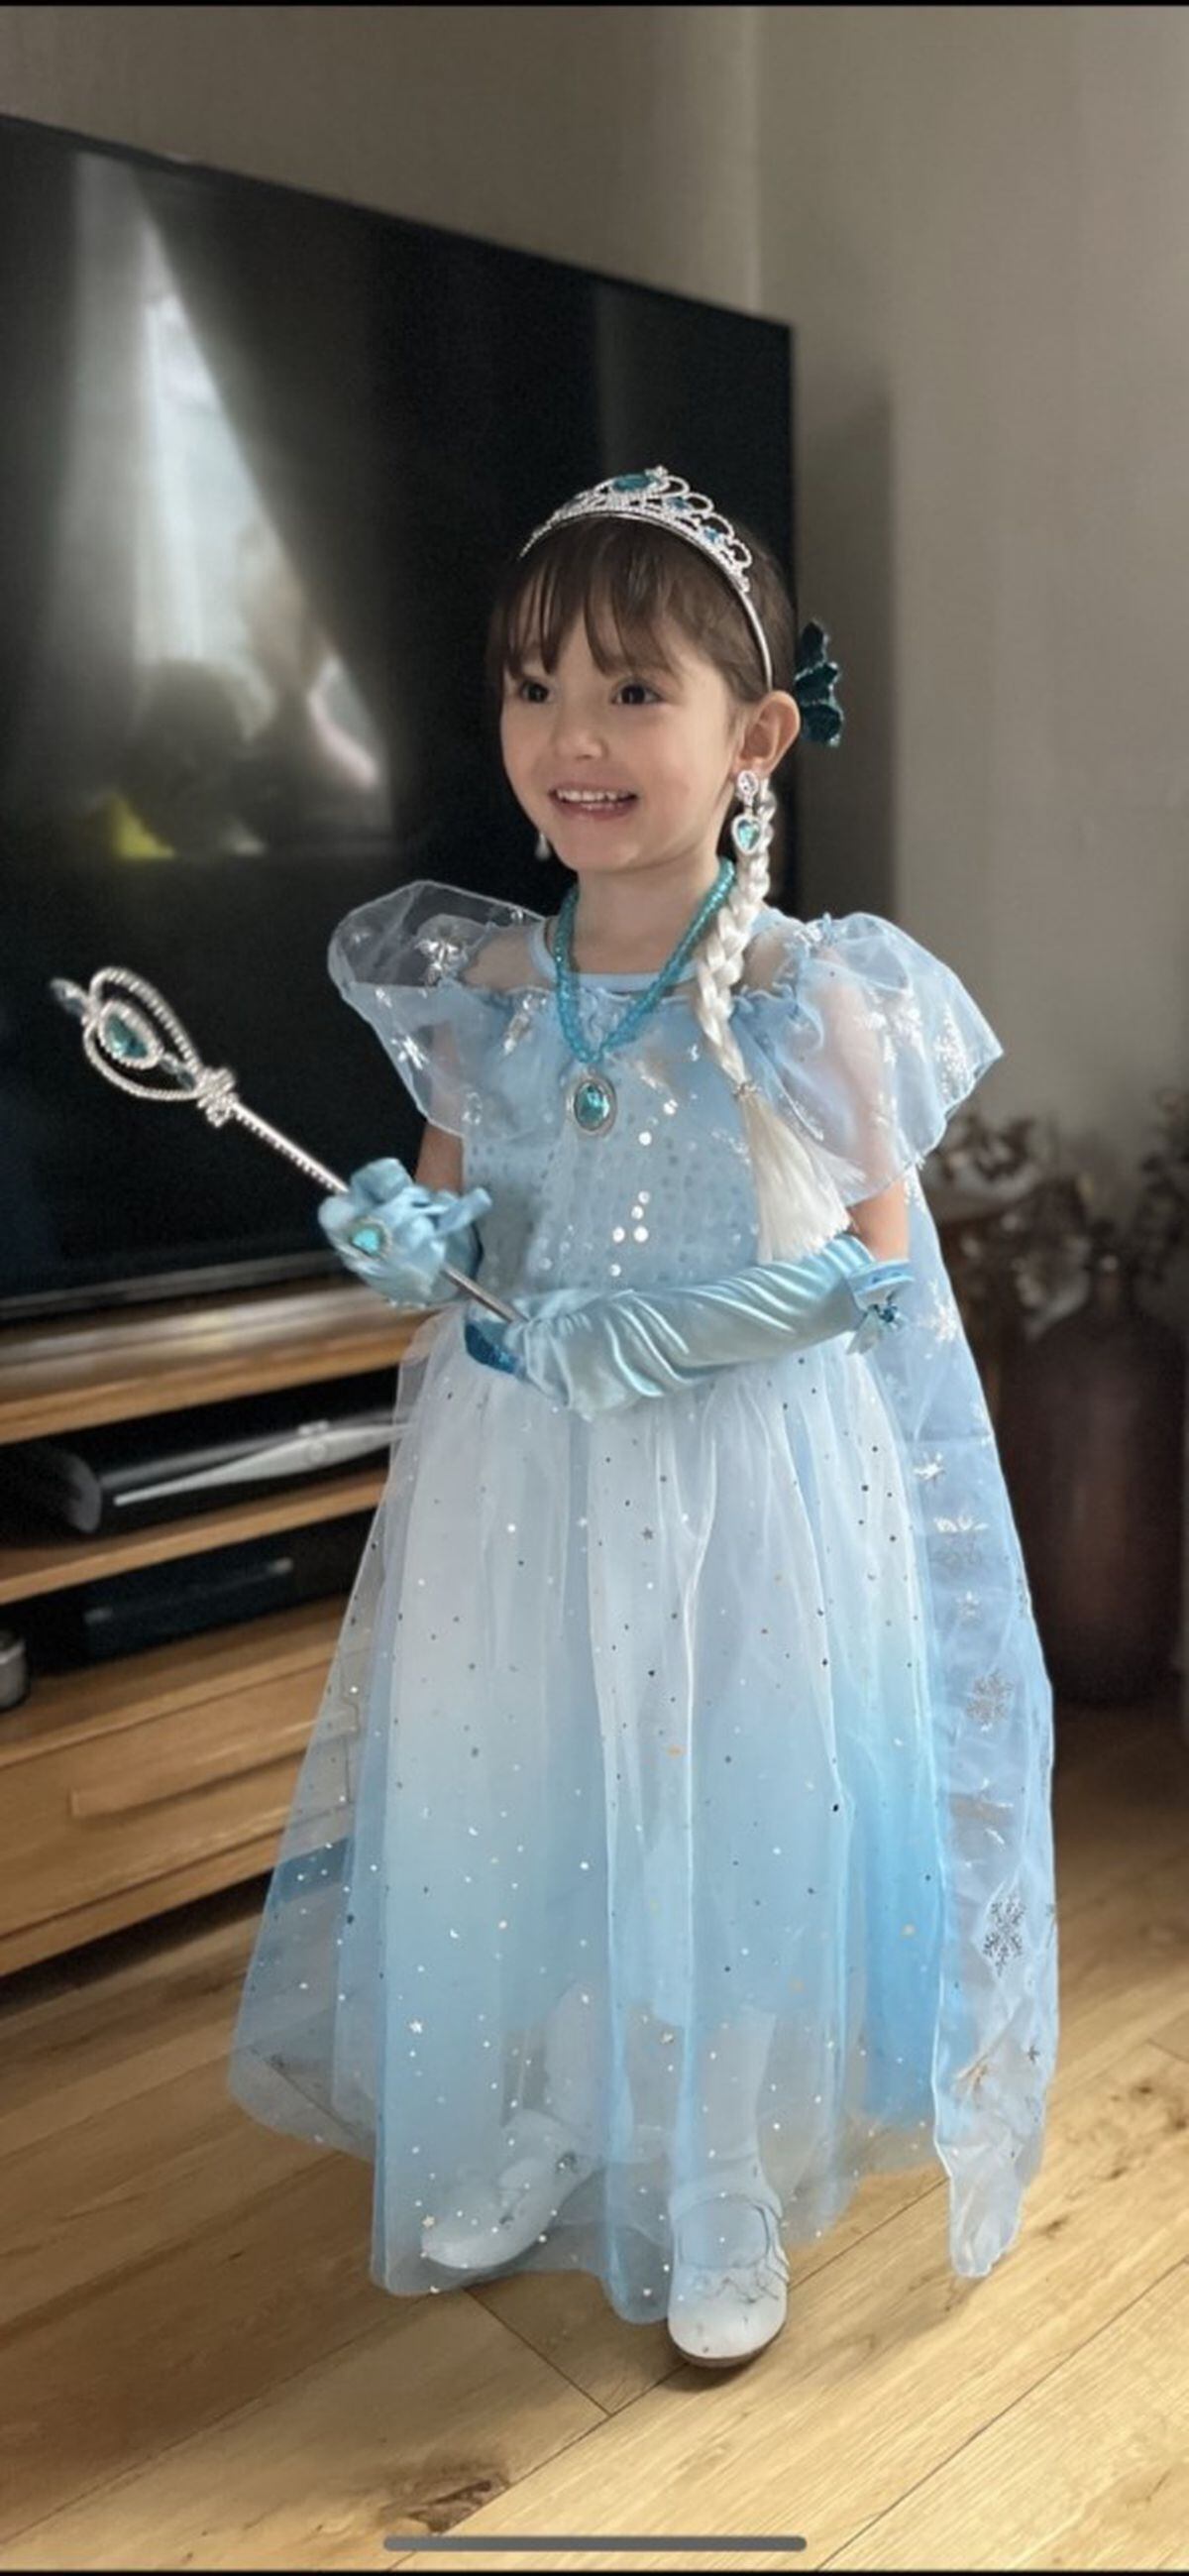 Harlow Peach, age 3 from Little Bells Nursery dressed up as her favourite book character Elsa